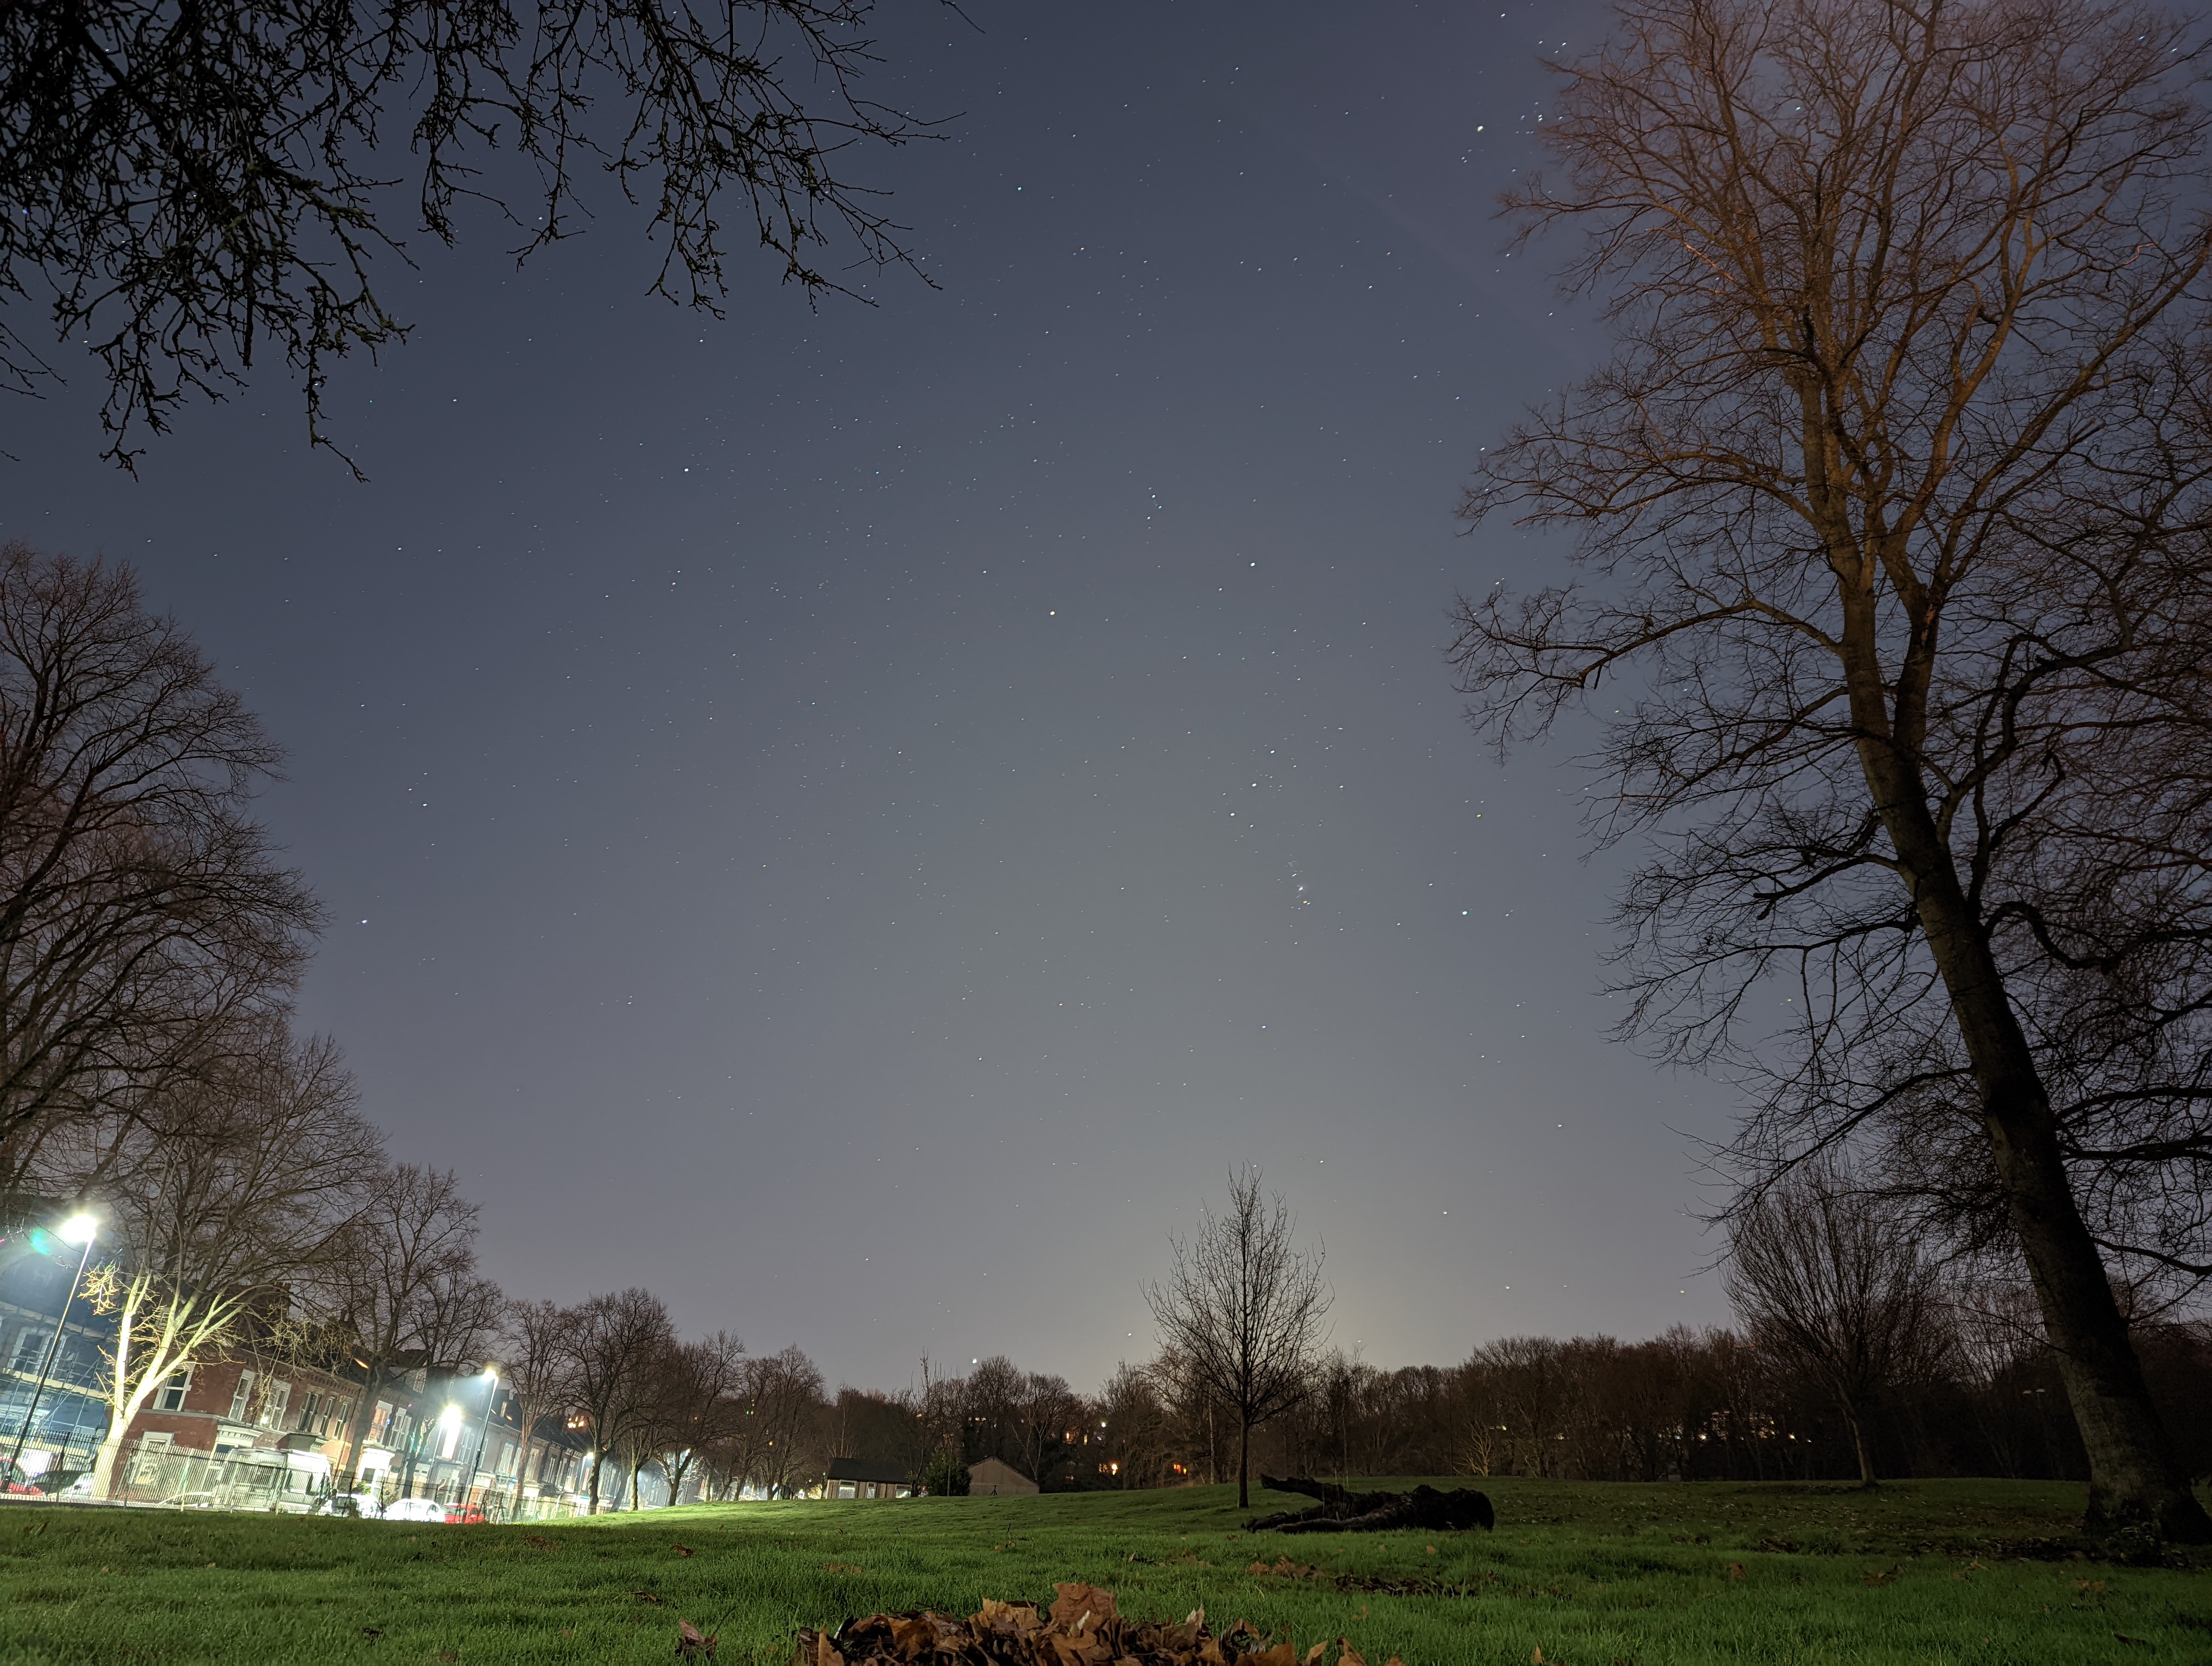 Pixel 6 Astrophotography mode, tripod mounted